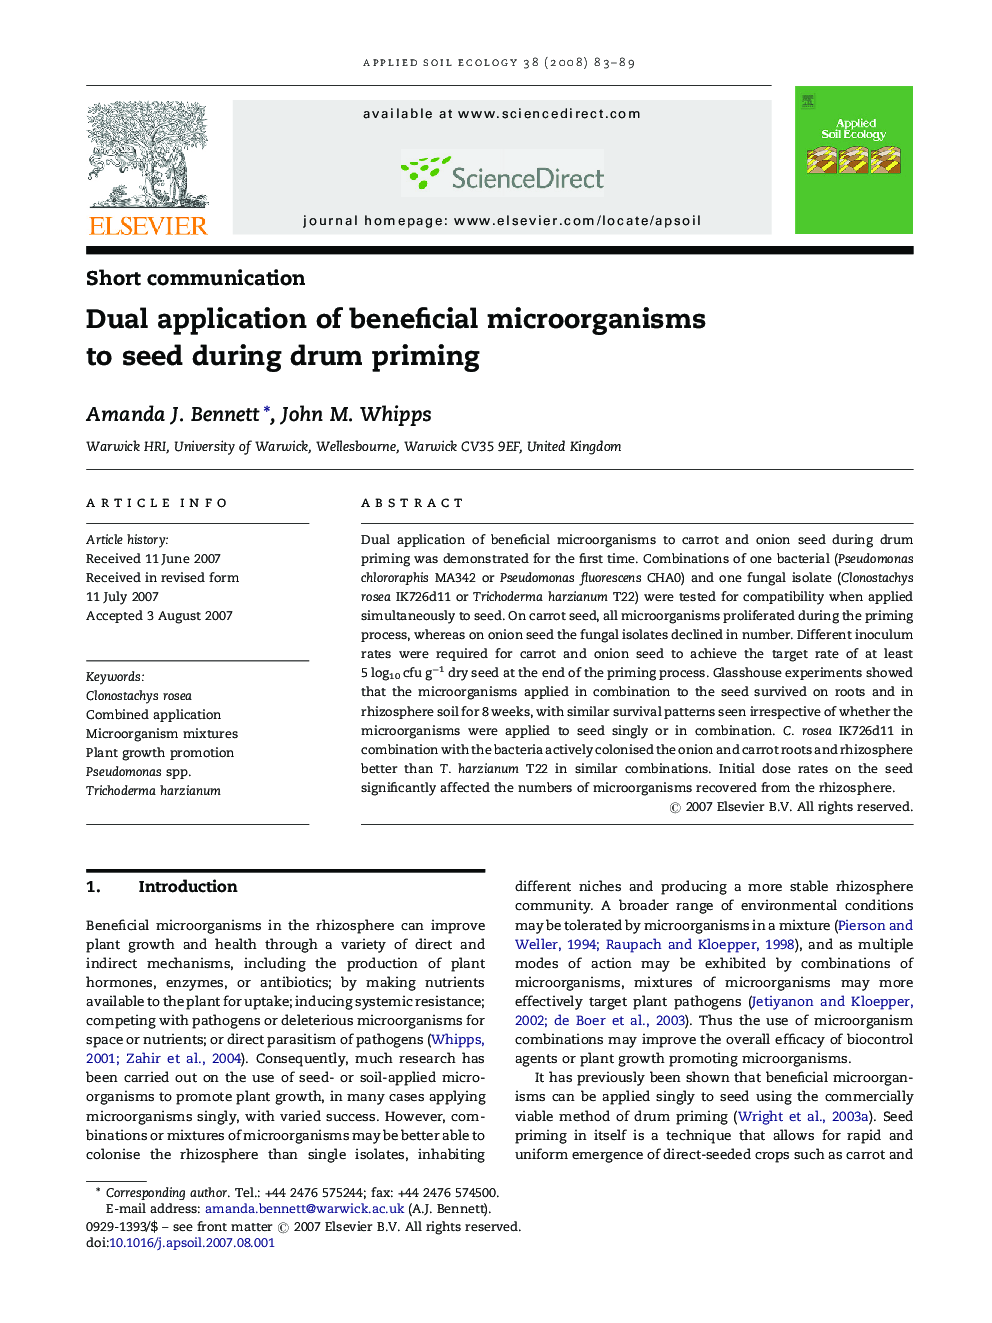 Dual application of beneficial microorganisms to seed during drum priming